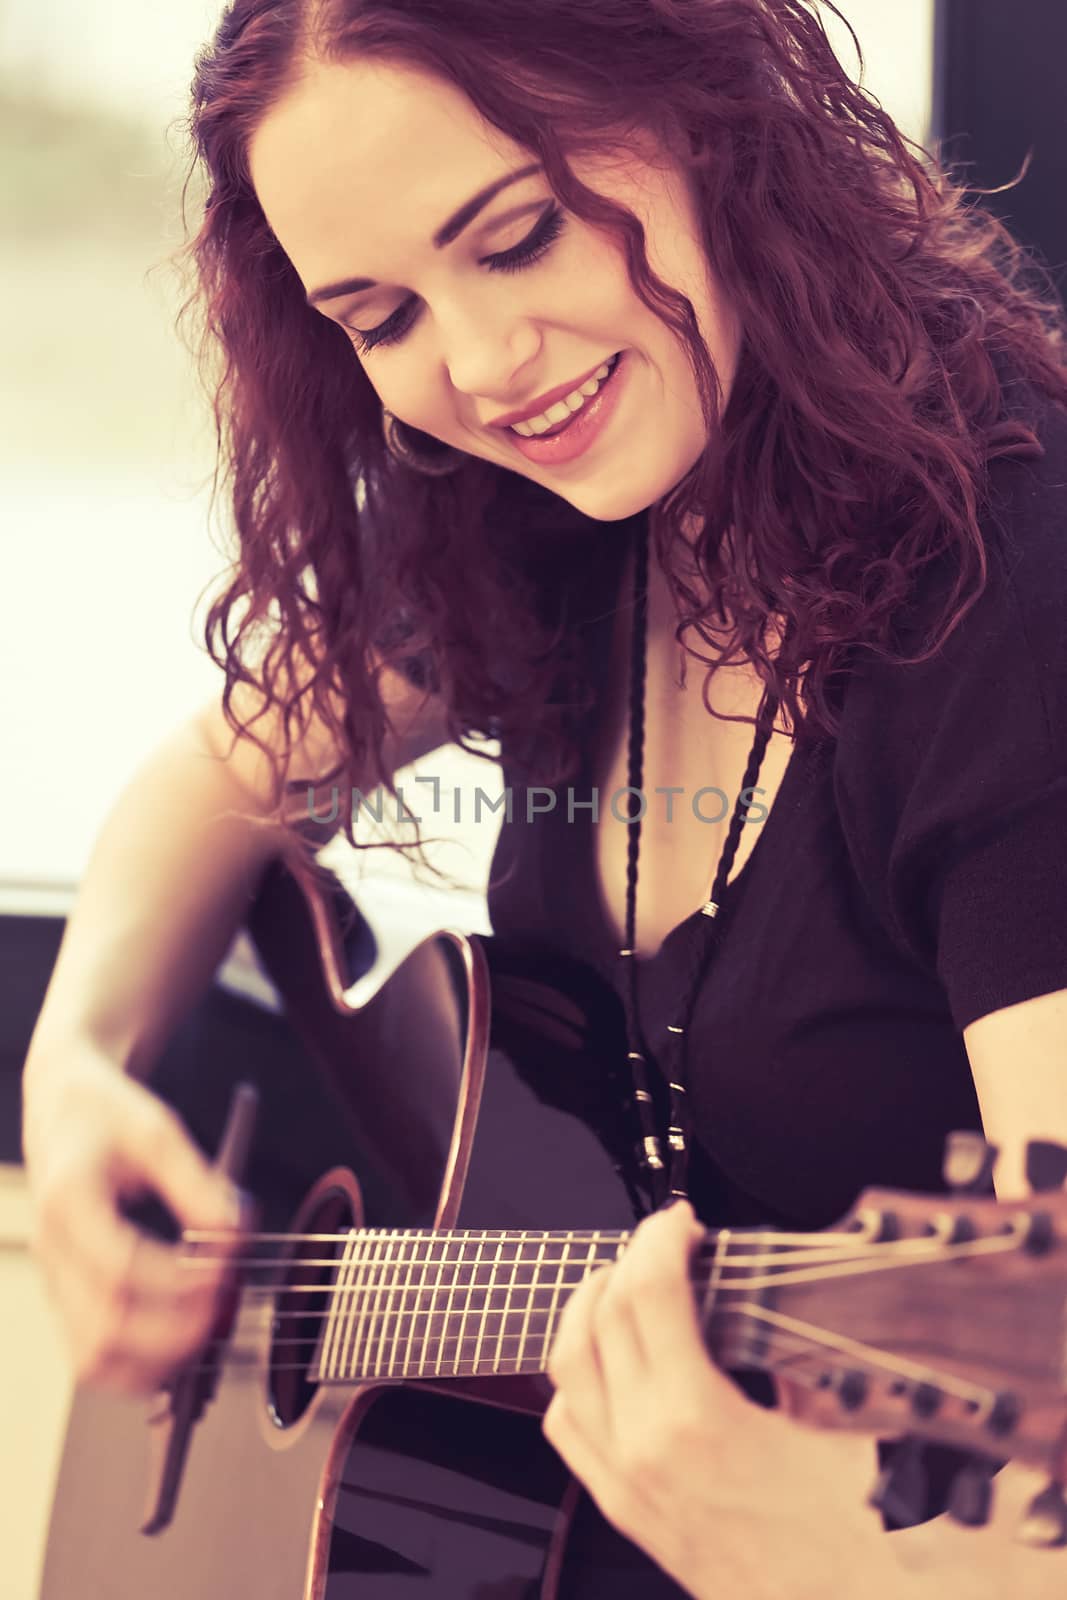 Photo of a woman playing an acoustic guitar by a window. Heavily filtered.
